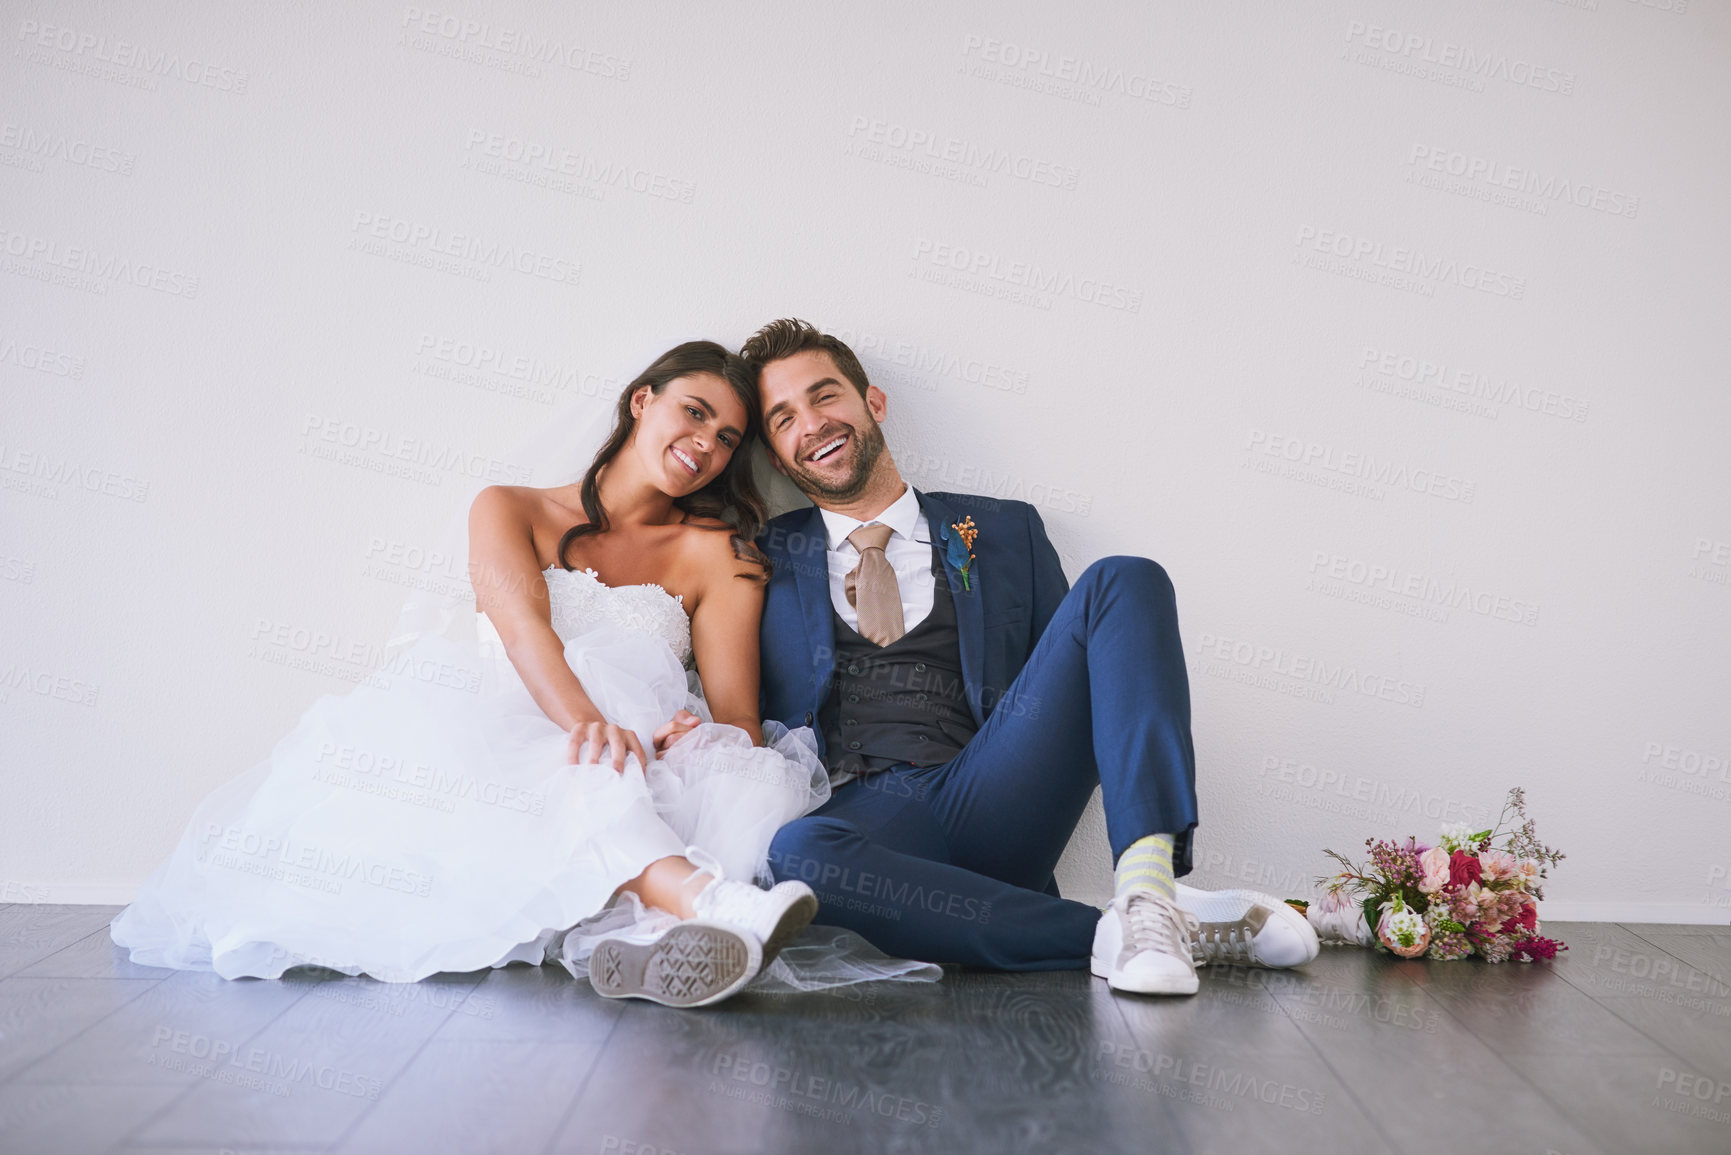 Buy stock photo Studio portrait of a newly married young couple sitting together on the floor against a gray background